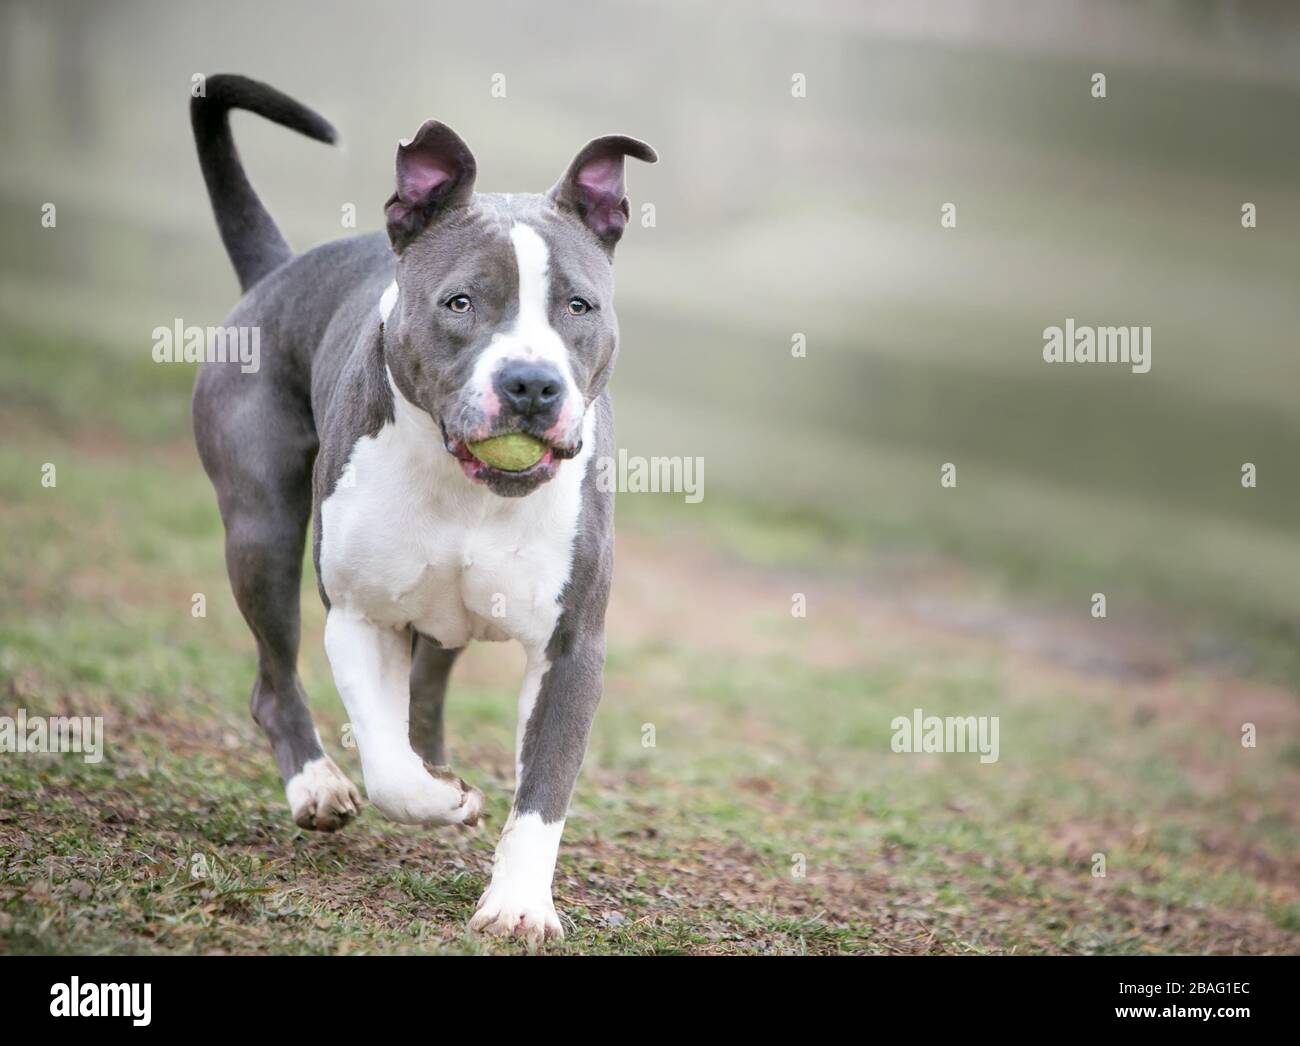 A playful gray and white Pit Bull Terrier mixed breed dog carrying a ball in its mouth Stock Photo